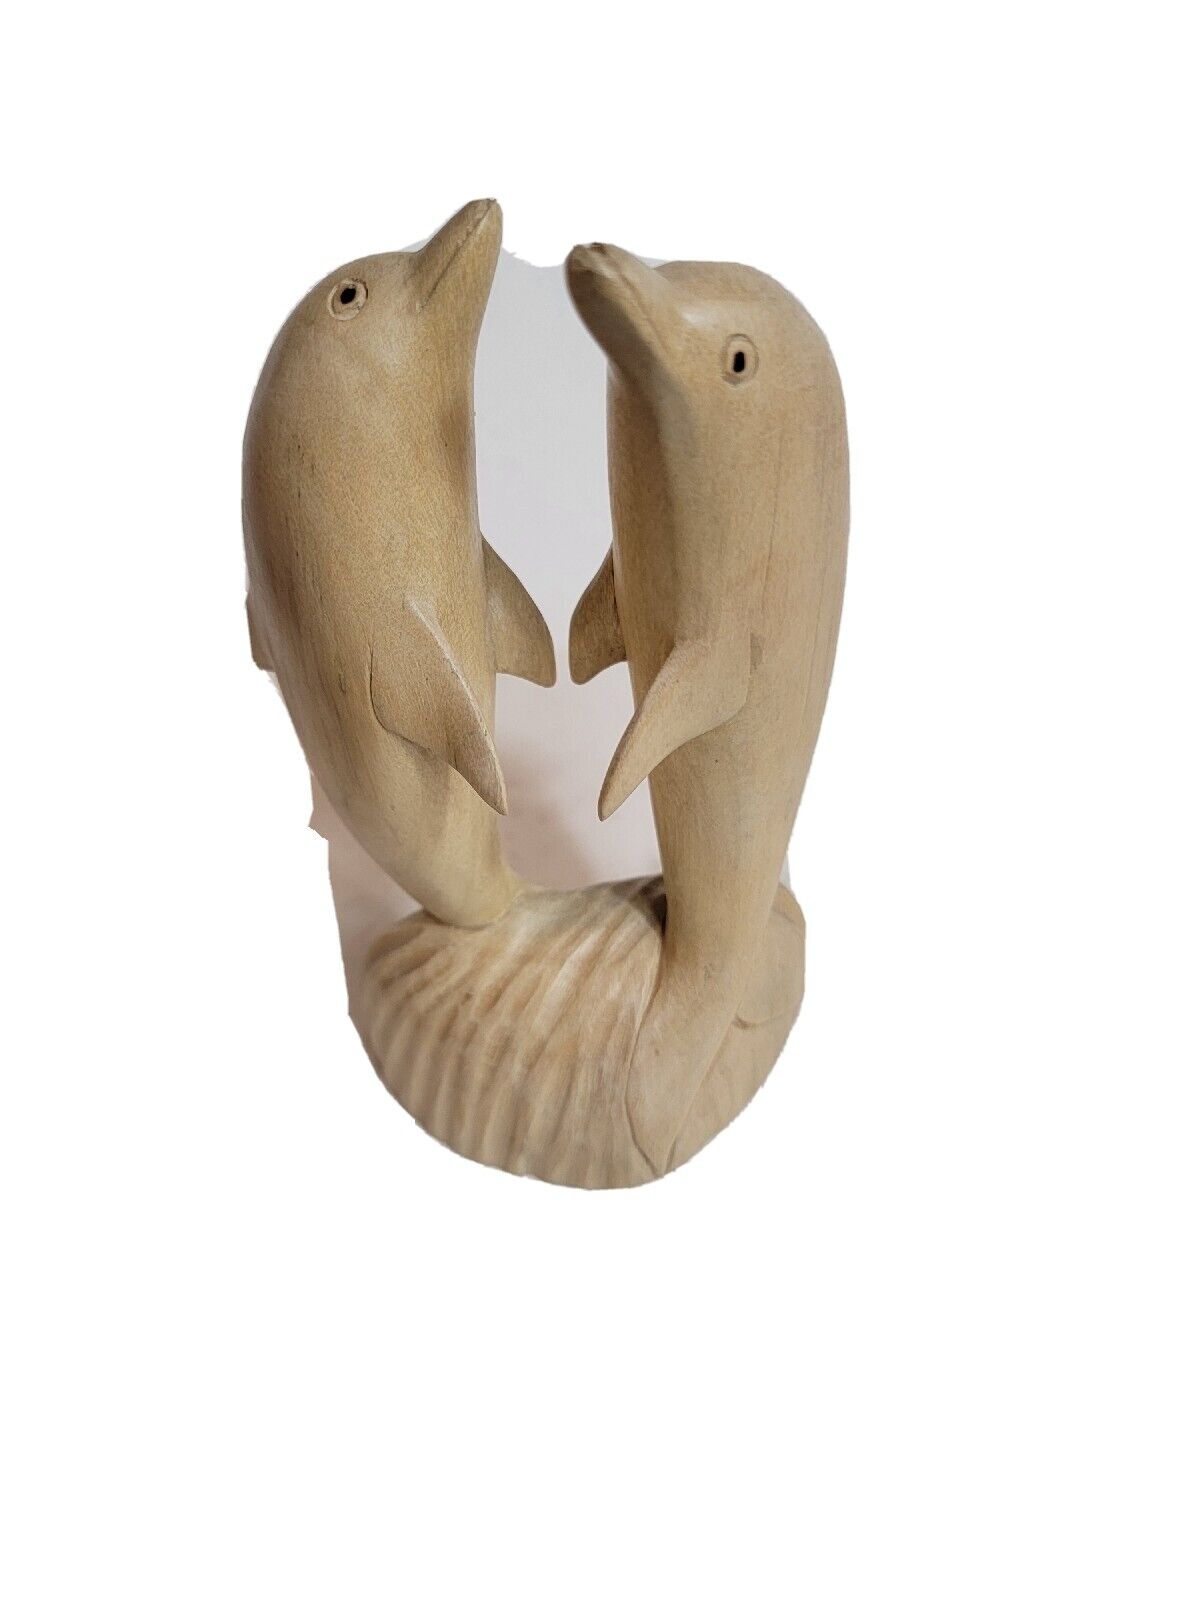 Dolphin Wooden Decor Hand Carved Dolphins Sculpture 6\